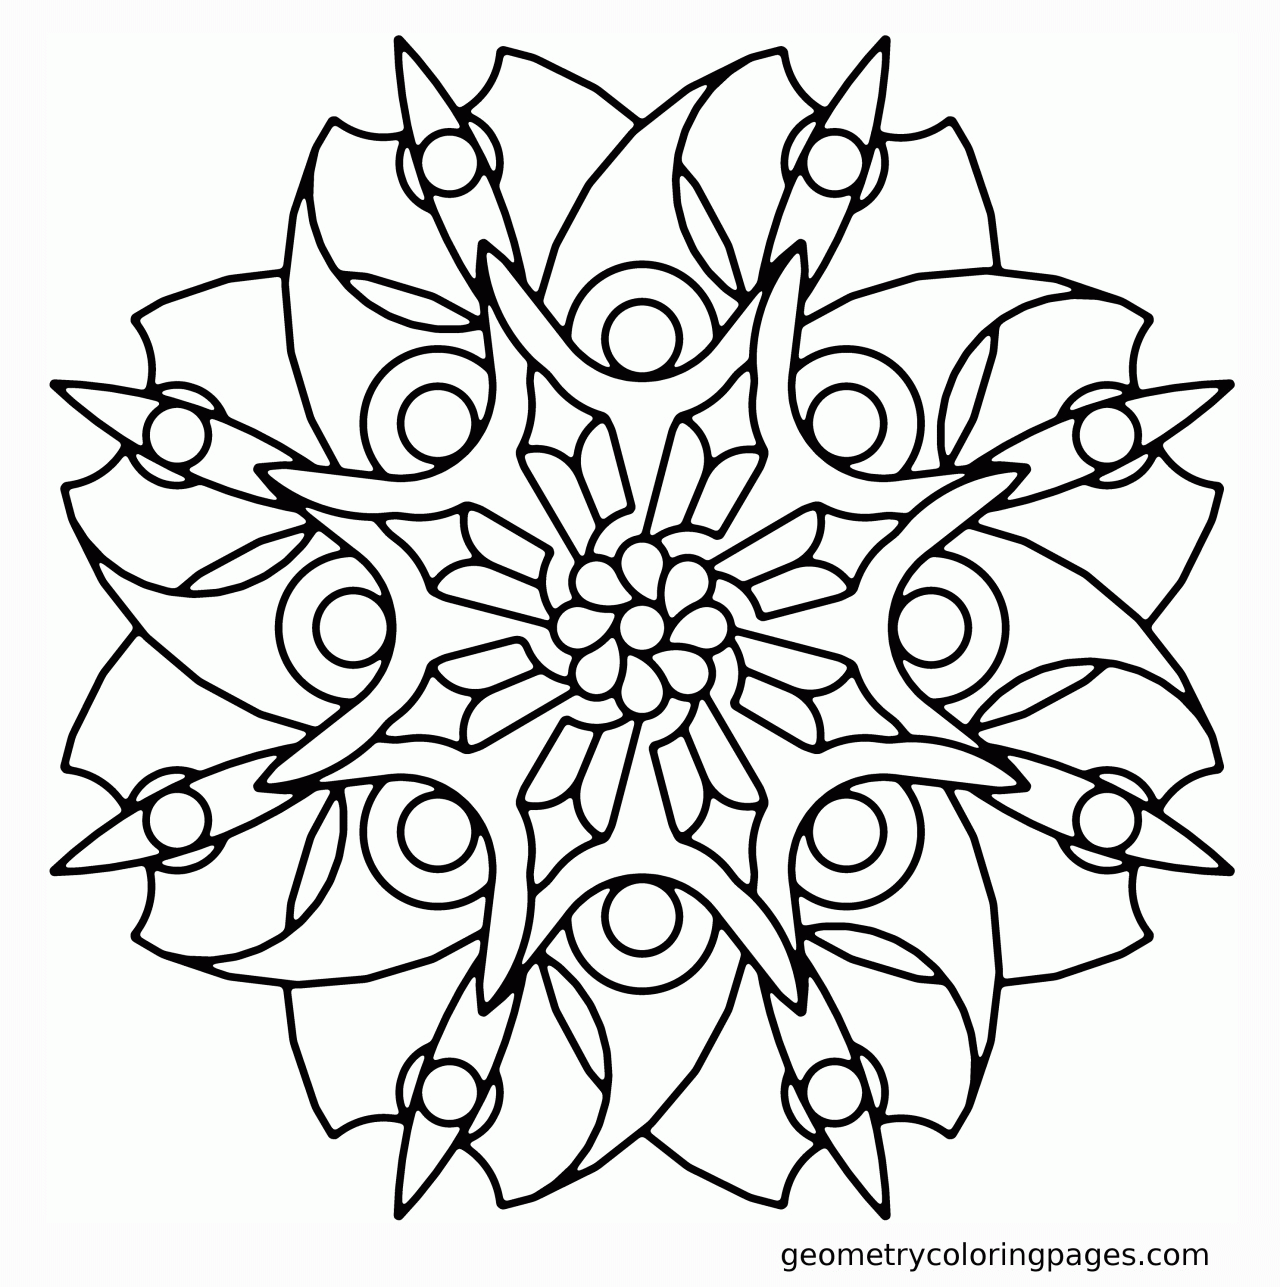 free-sacred-geometry-coloring-pages-download-free-sacred-geometry